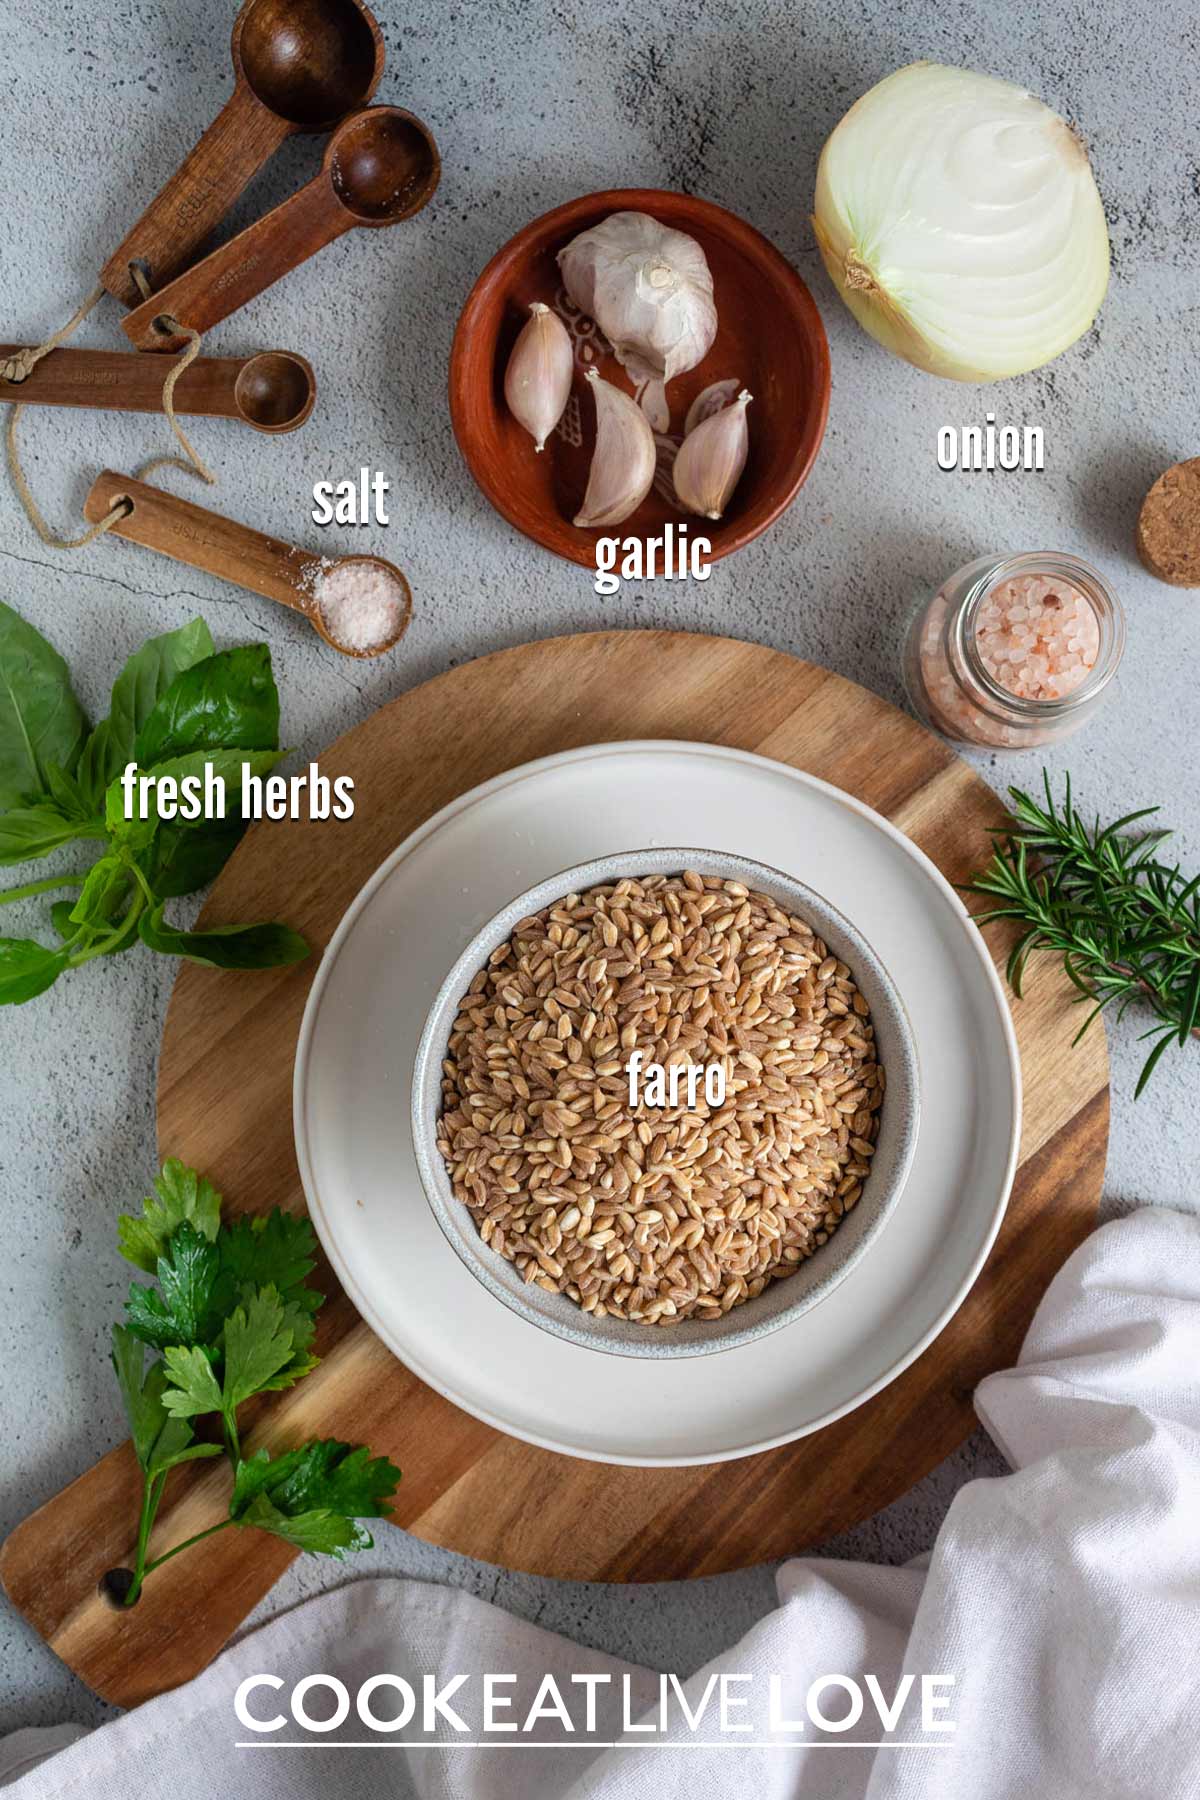 Ingredients to make instant pot farro on the table with text labels.